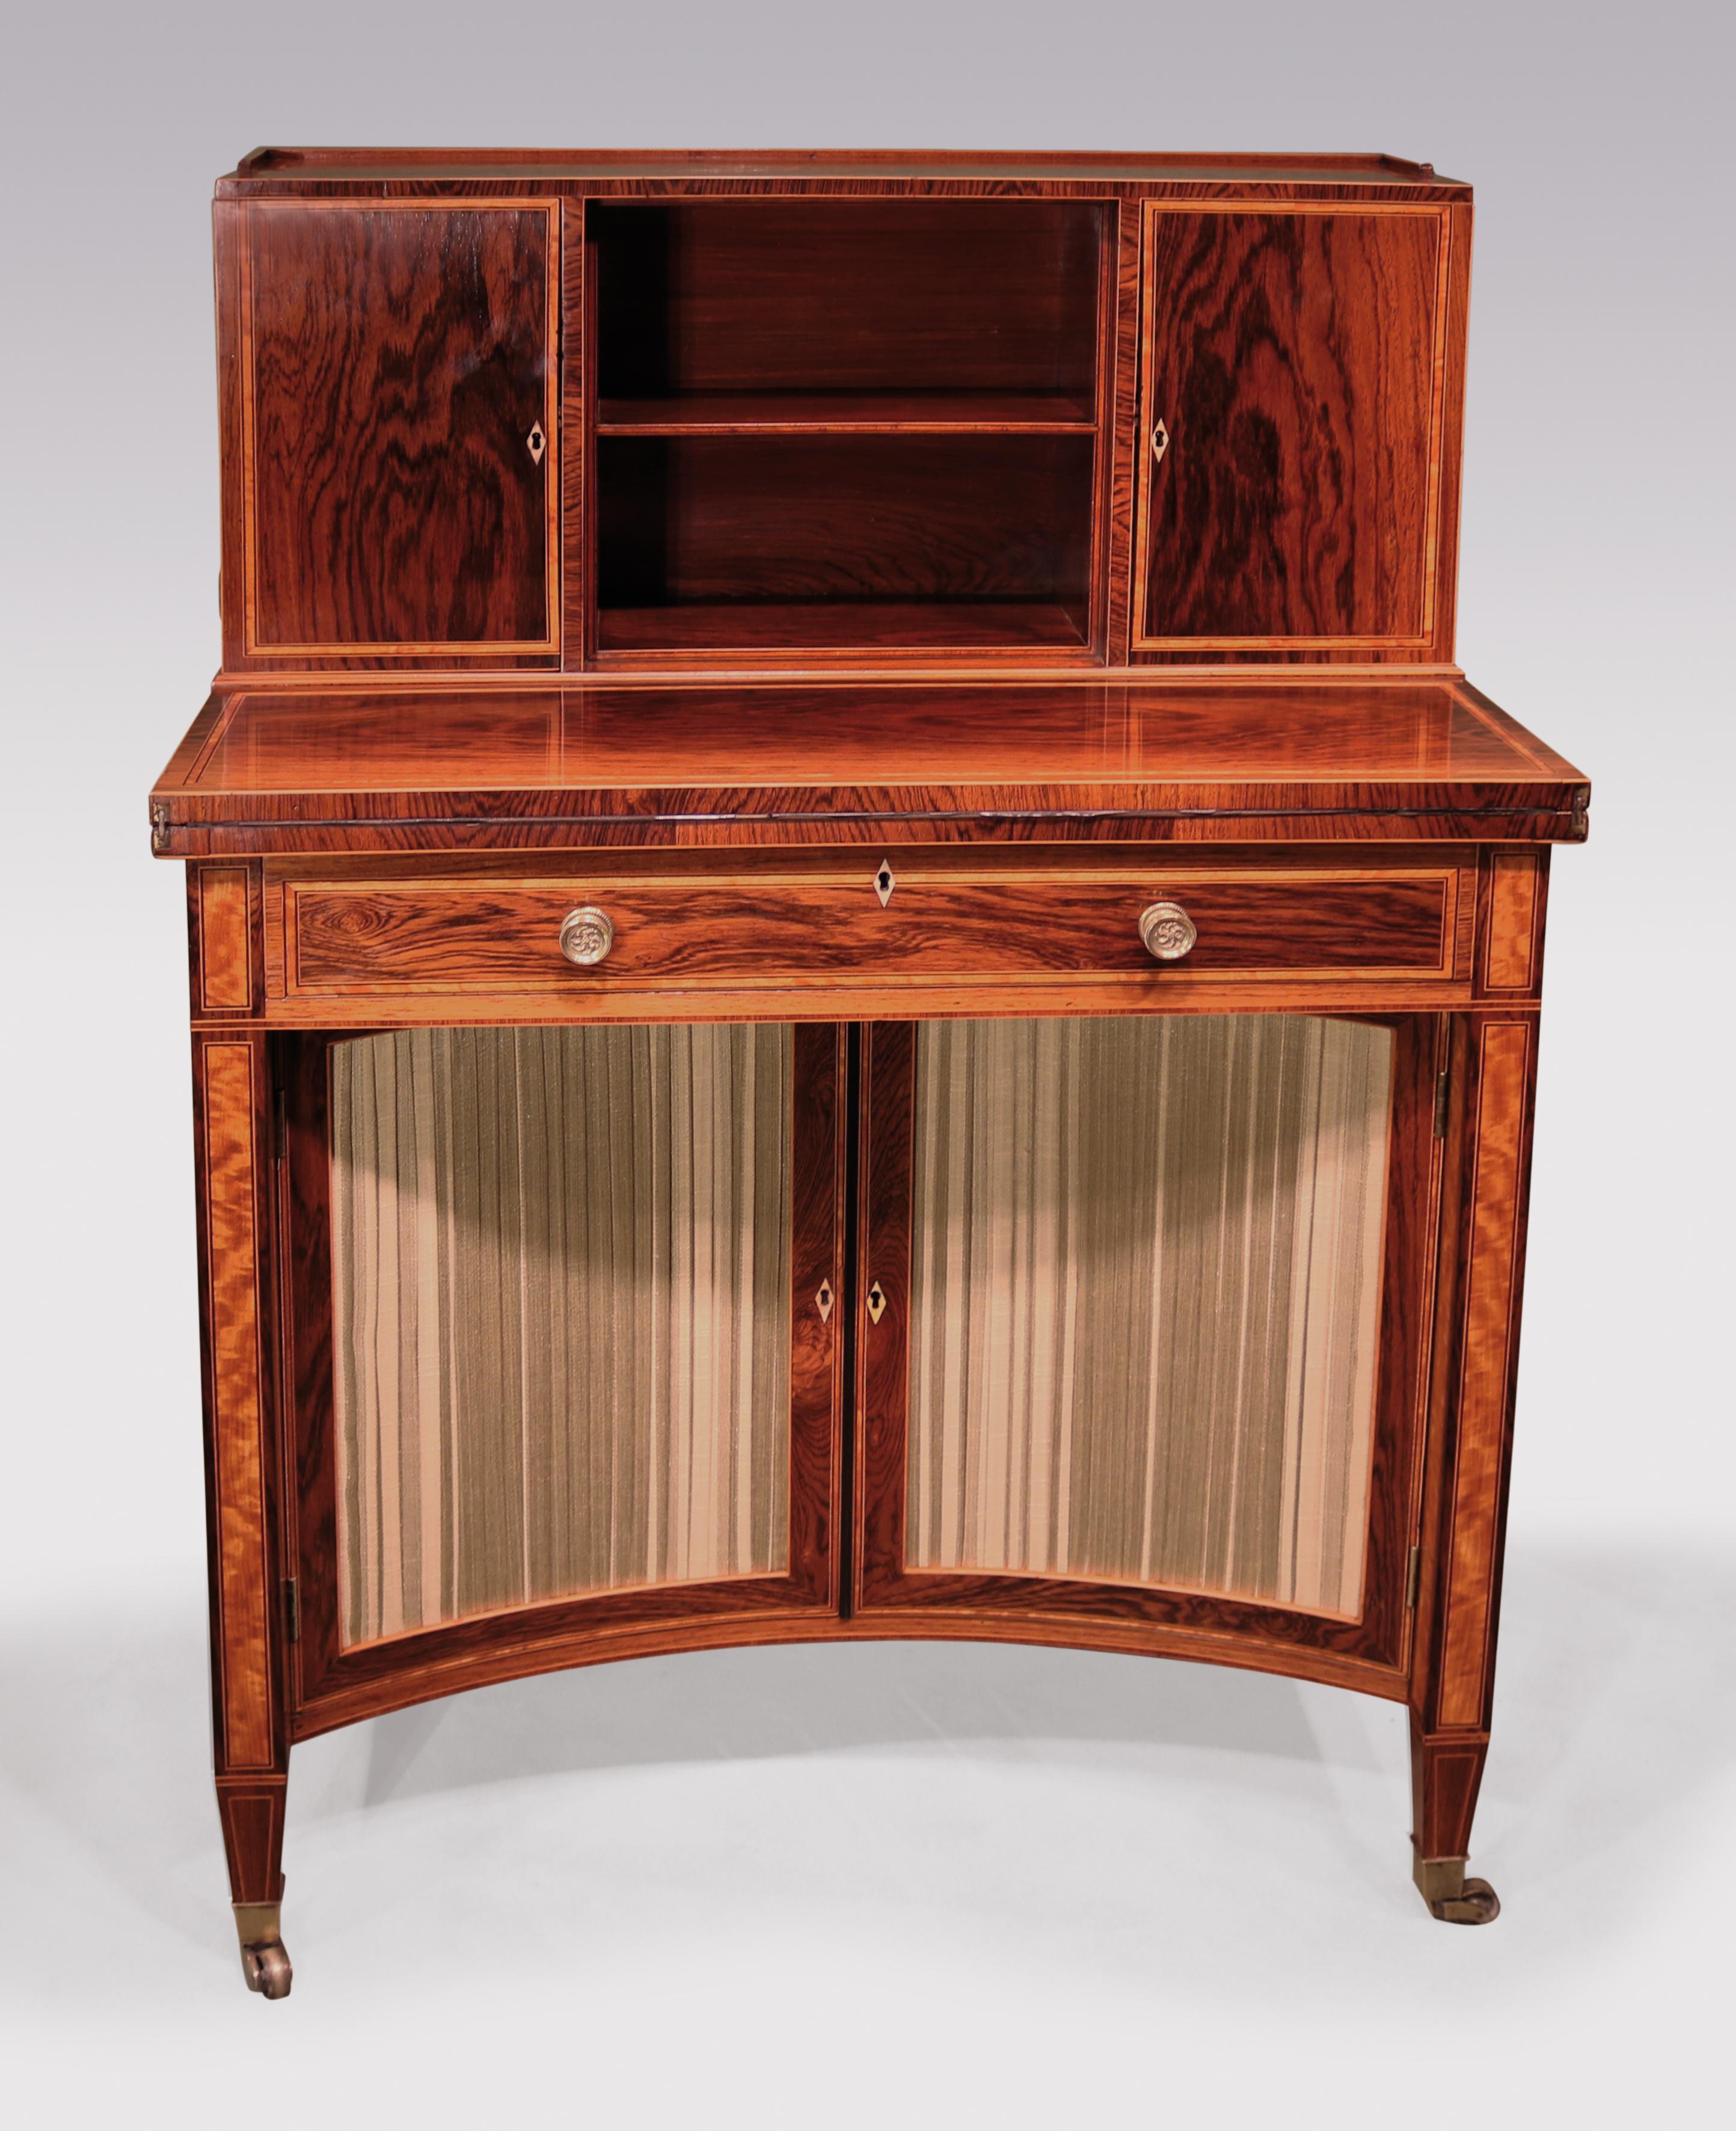 A fine George III period rosewood veneered concave door cabinet, boxwood and ebony strung & satinwood banded throughout, having galleried upper section with doors enclosing drawers & slides. The piece, with fold-over writing surface above frieze